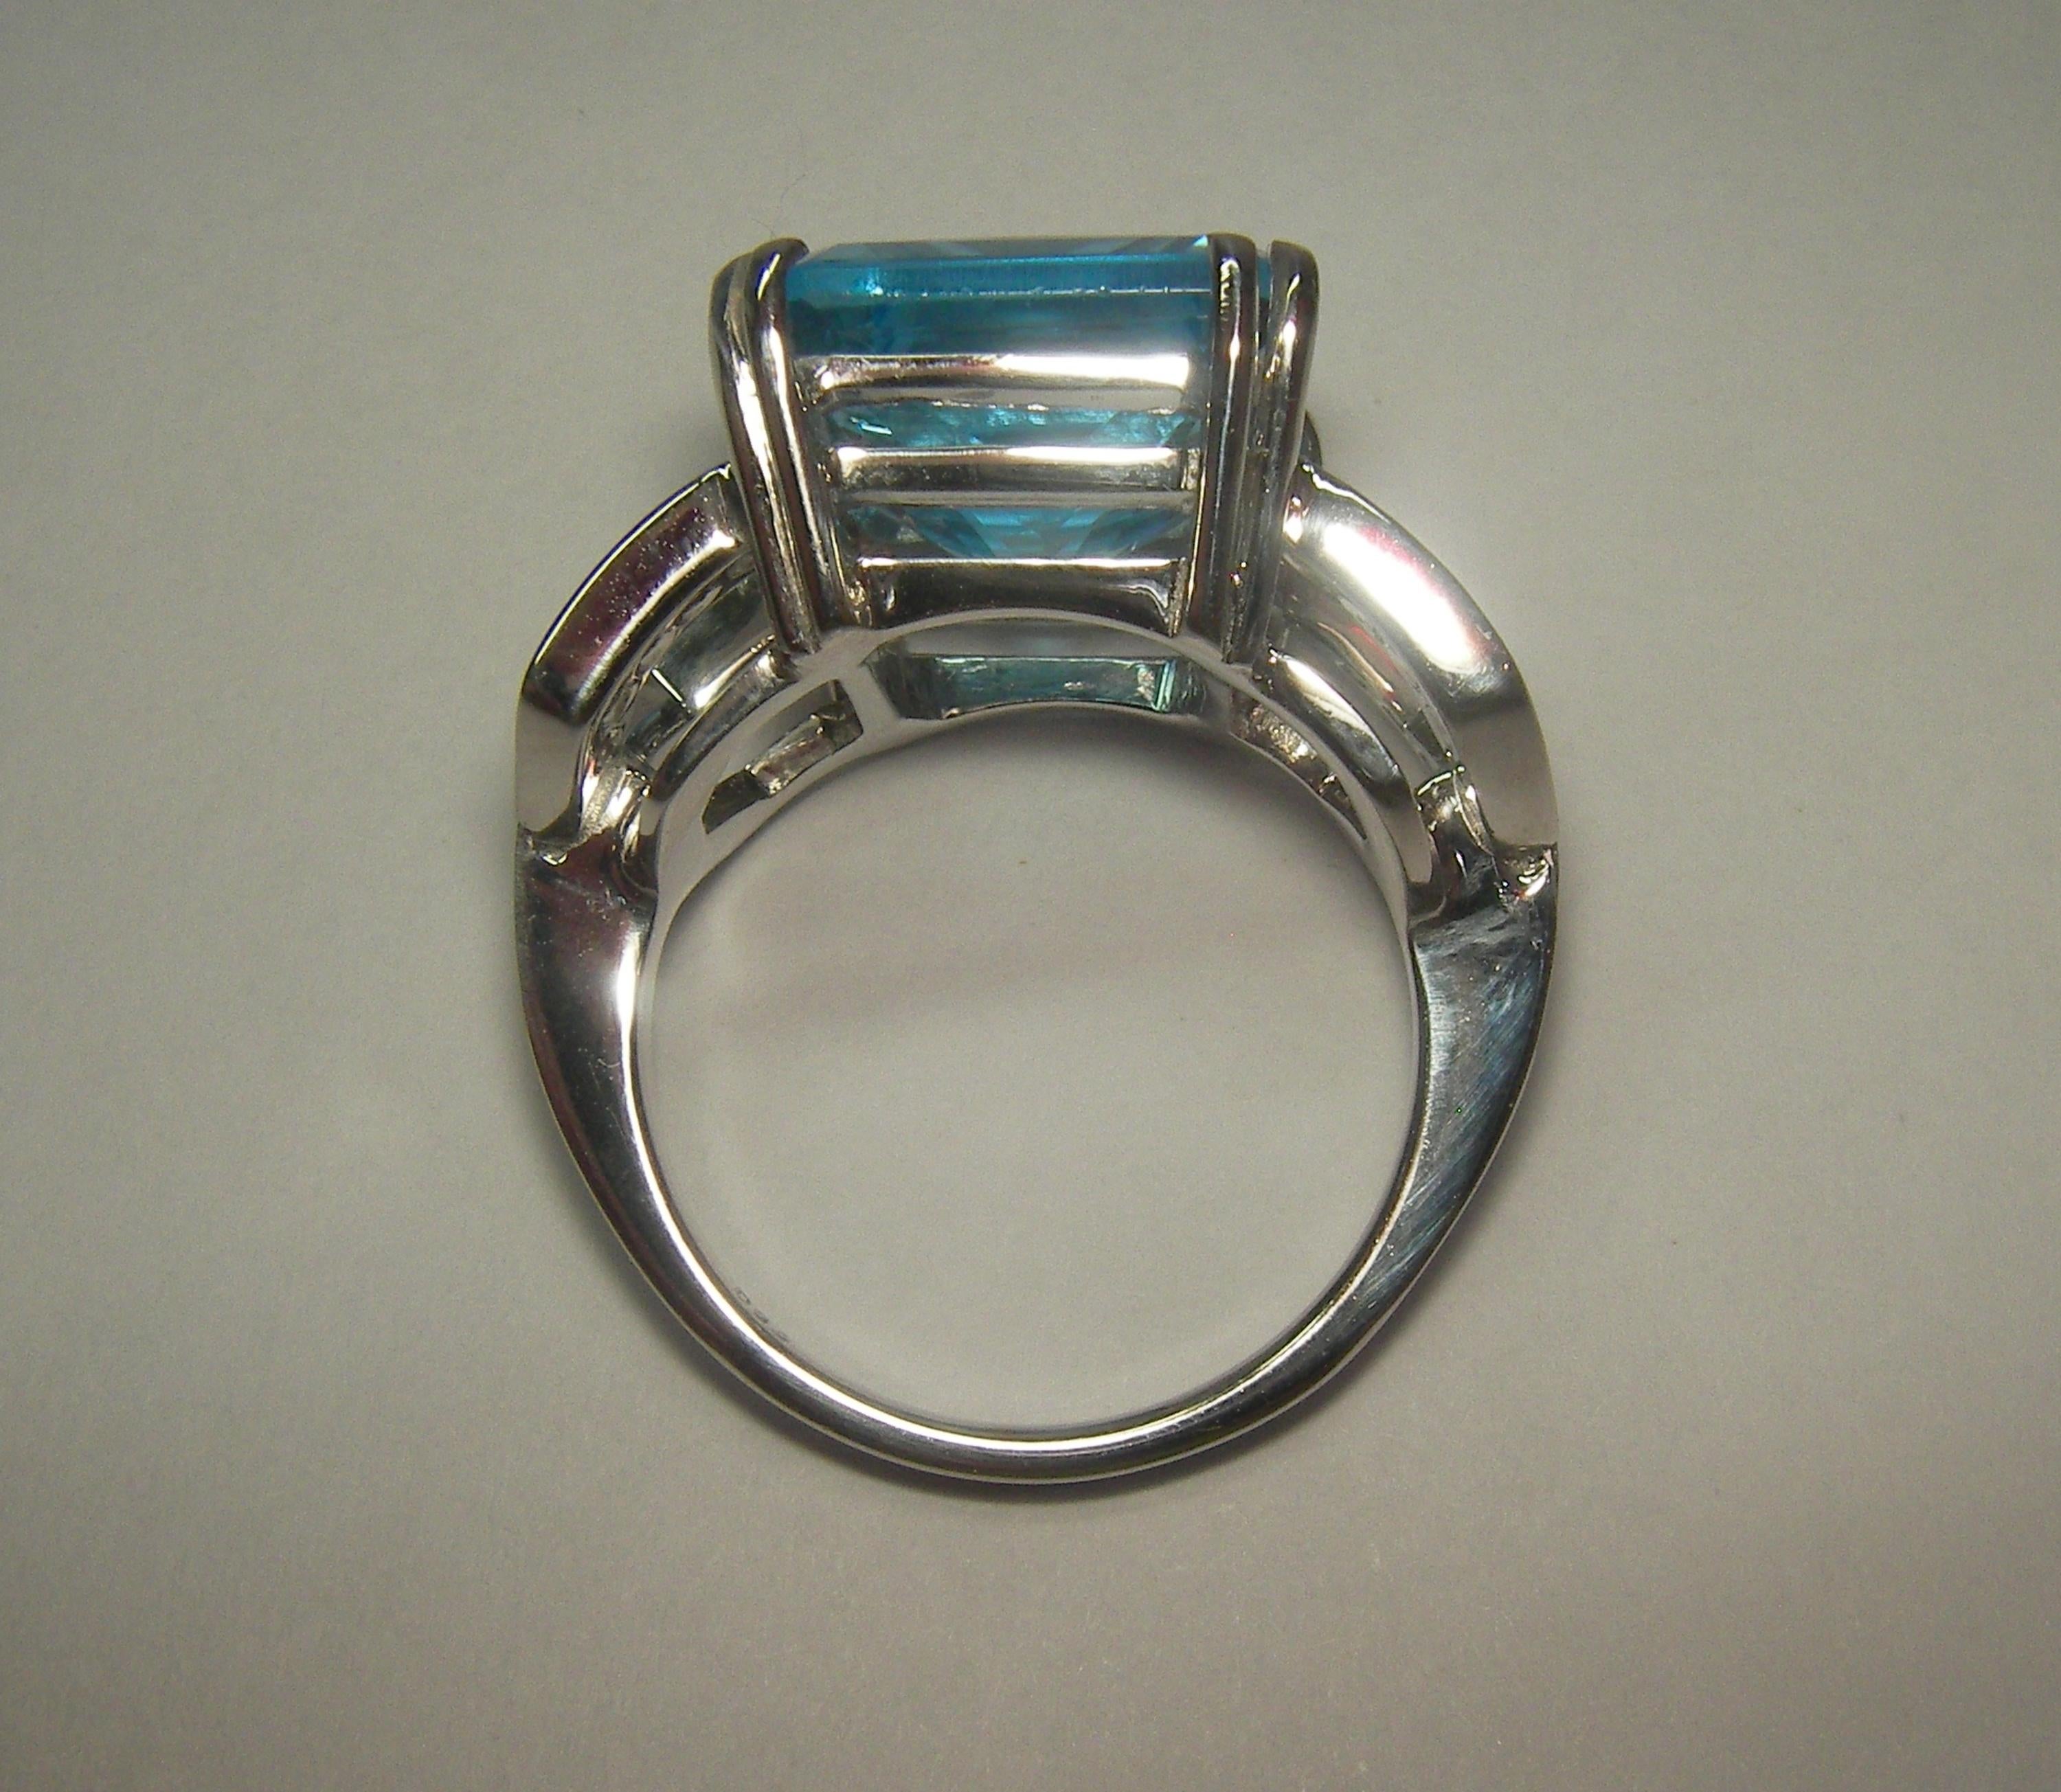 what is the inside of a ring called